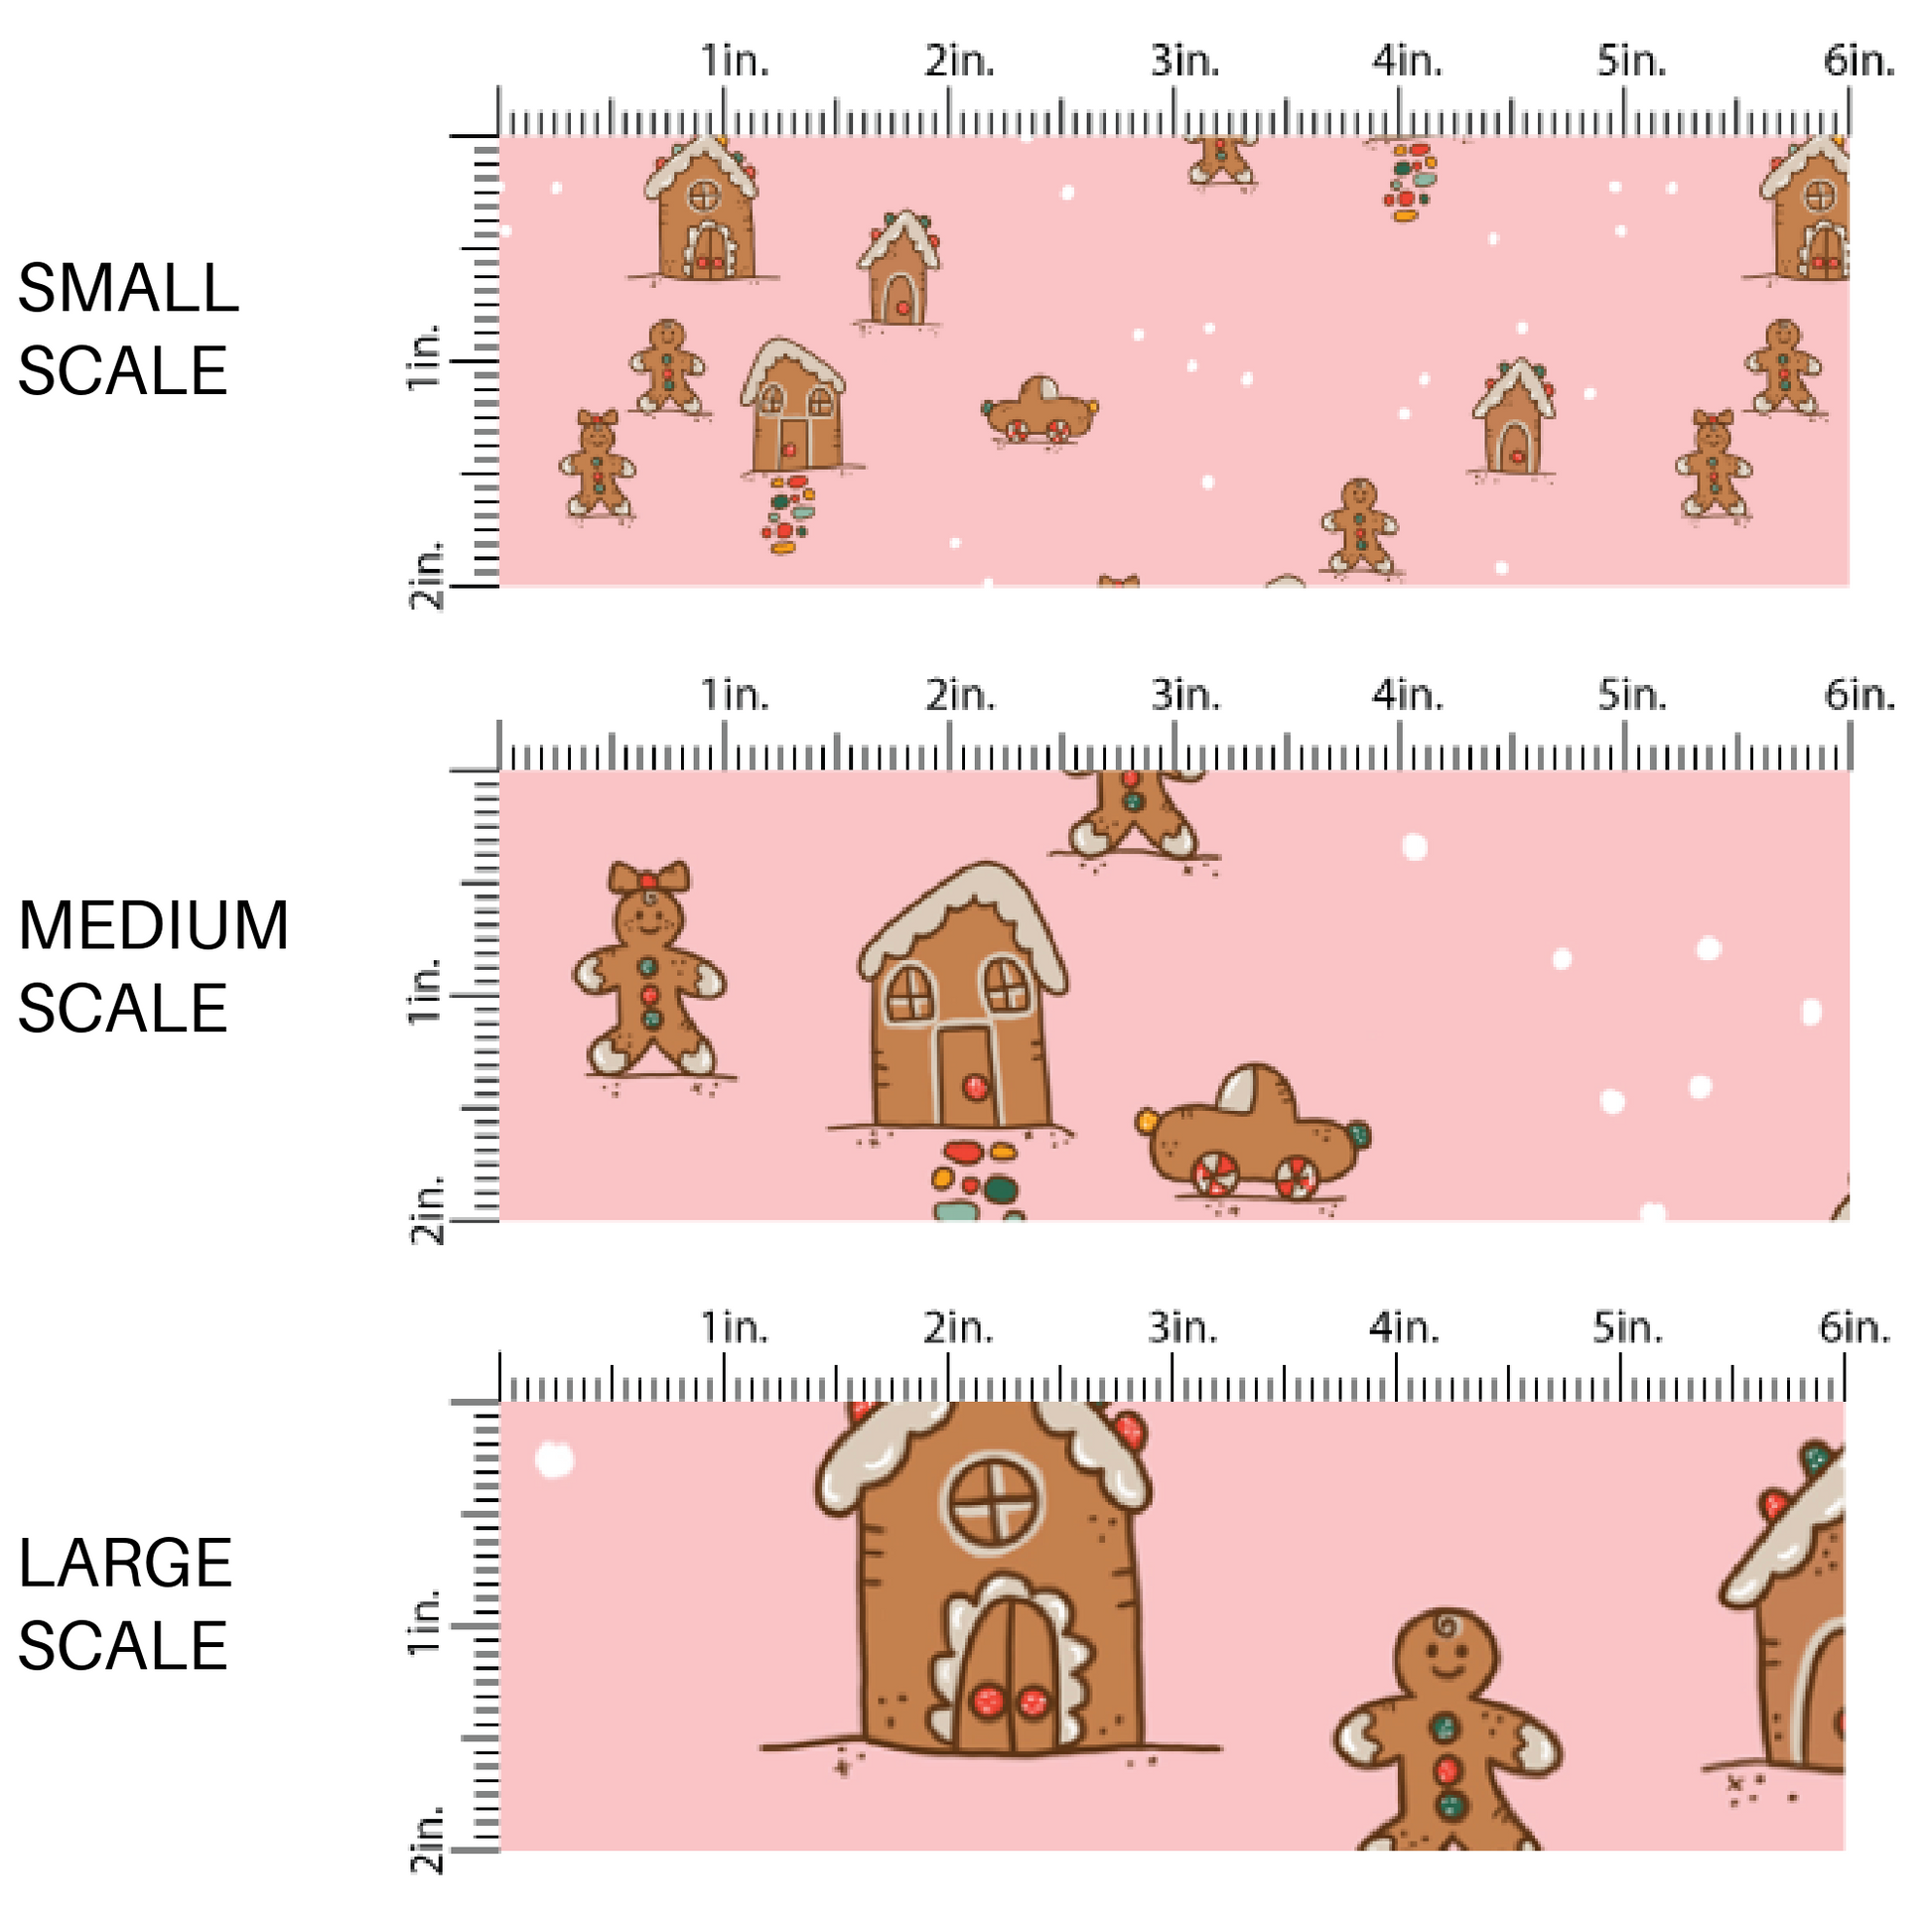 Pink gingerbread people and gingerbread houses fabric by the yard scaled image guide.